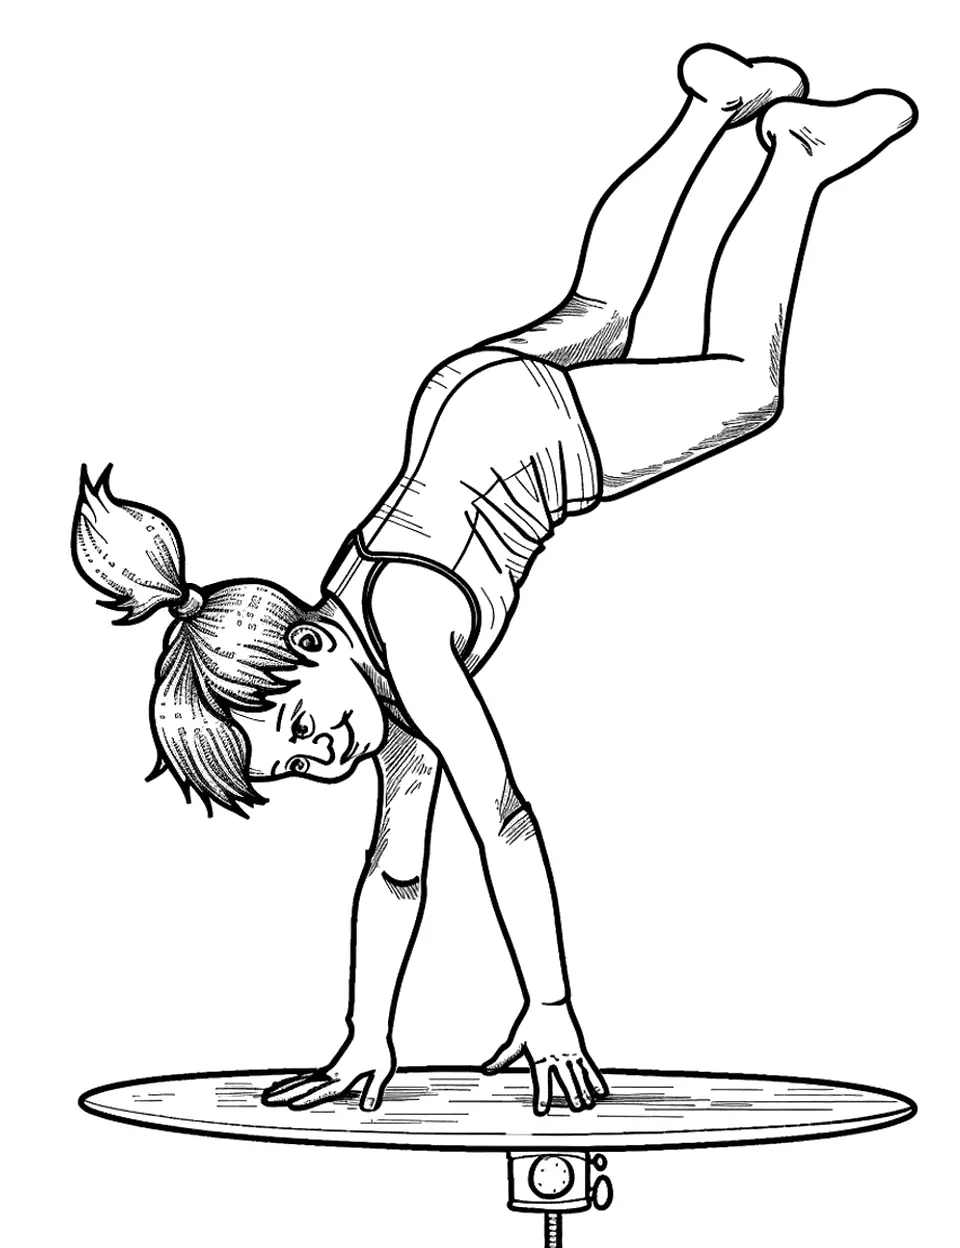 Gymnastic Dreams Sports Coloring Page - A gymnast performing a handstand on the balance table.